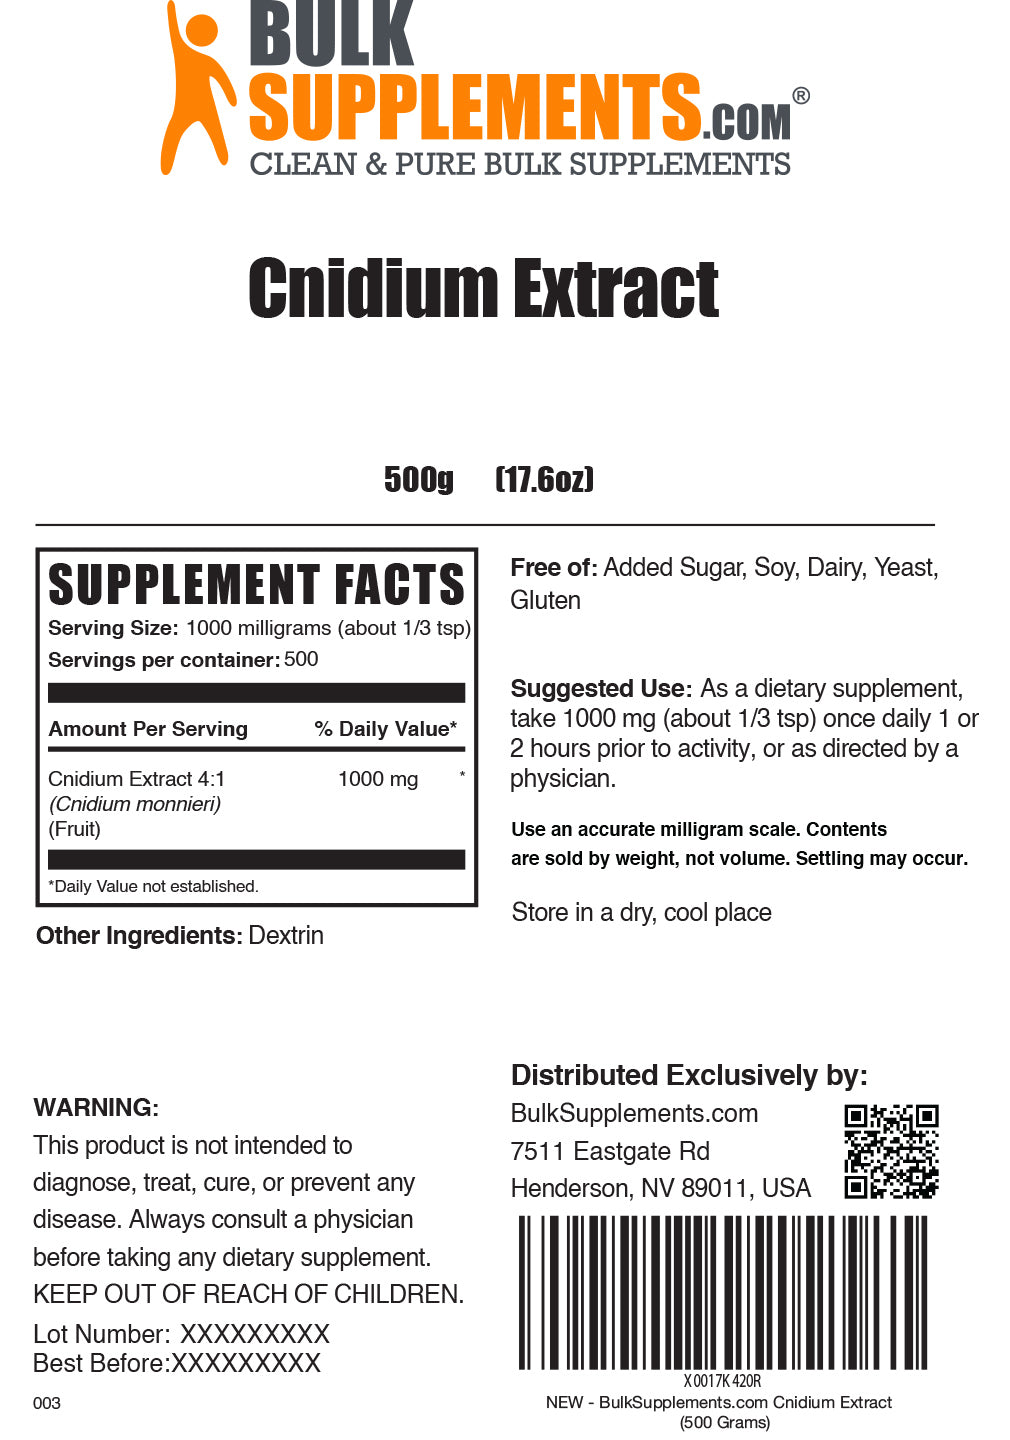 Supplement Facts for Cnidium Extract